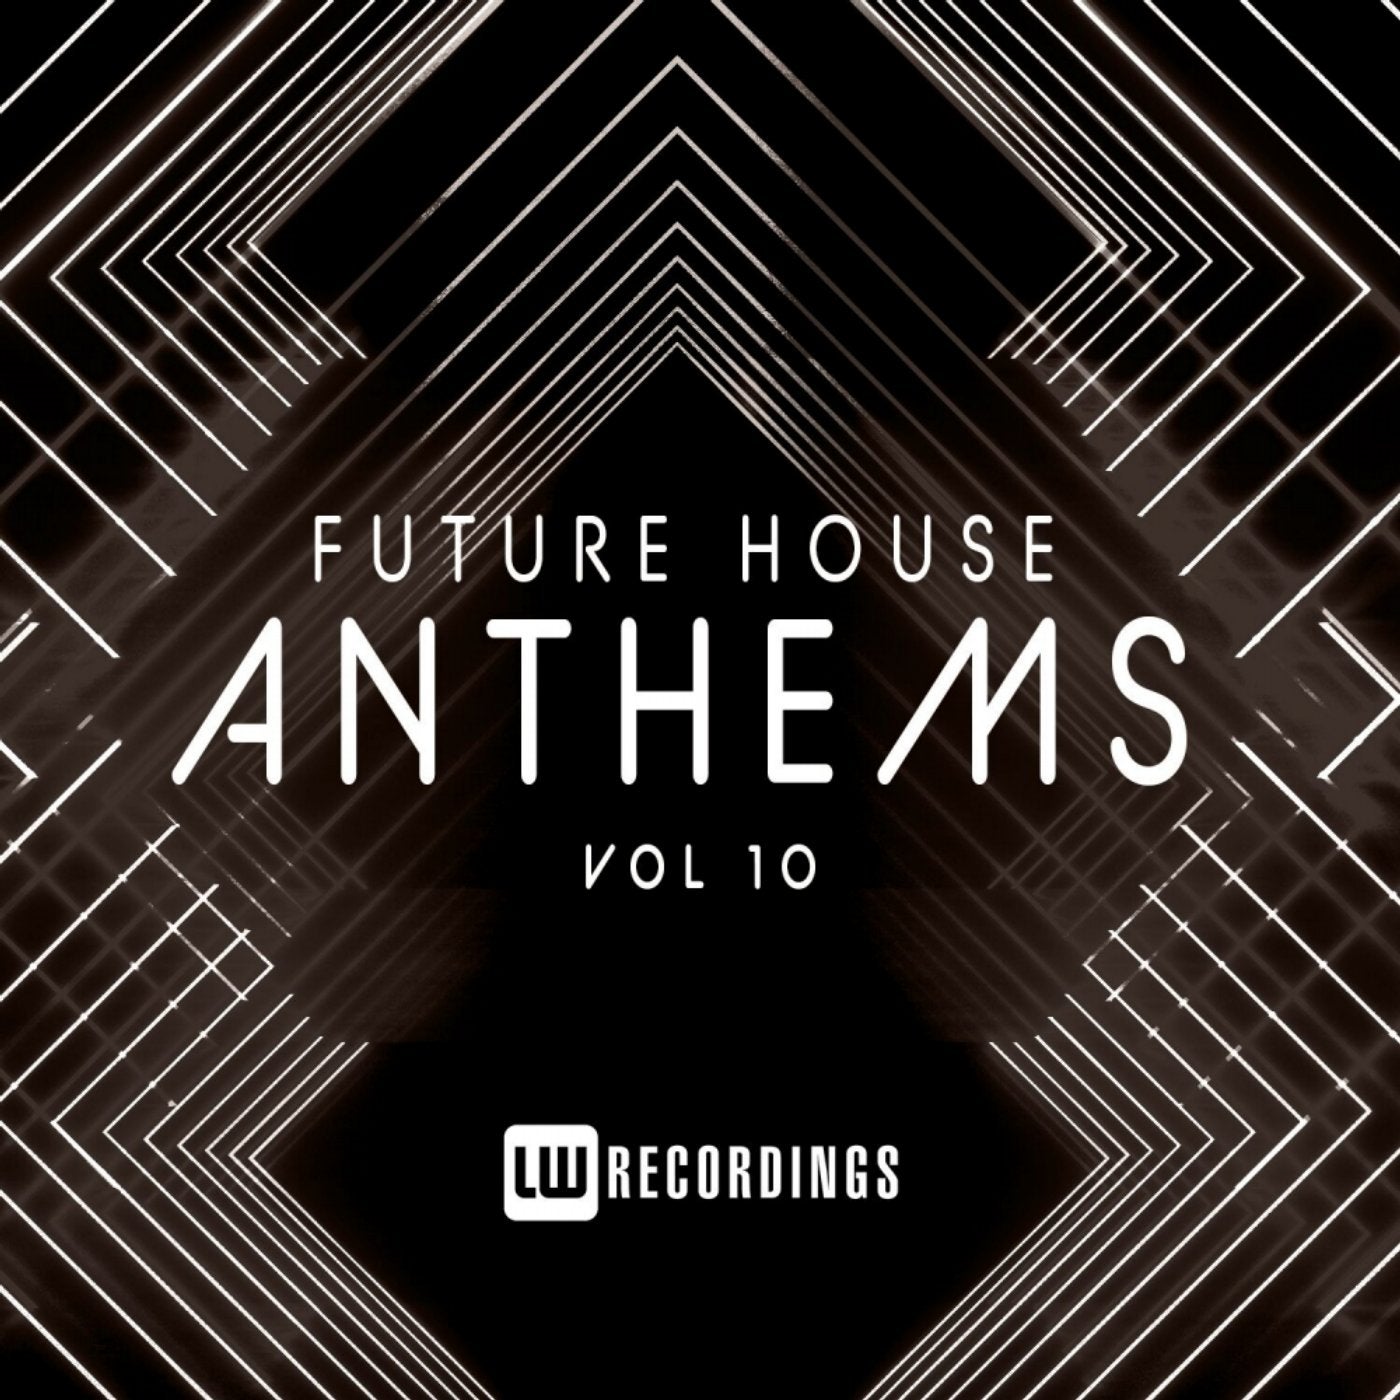 Future House Anthems, Vol. 10